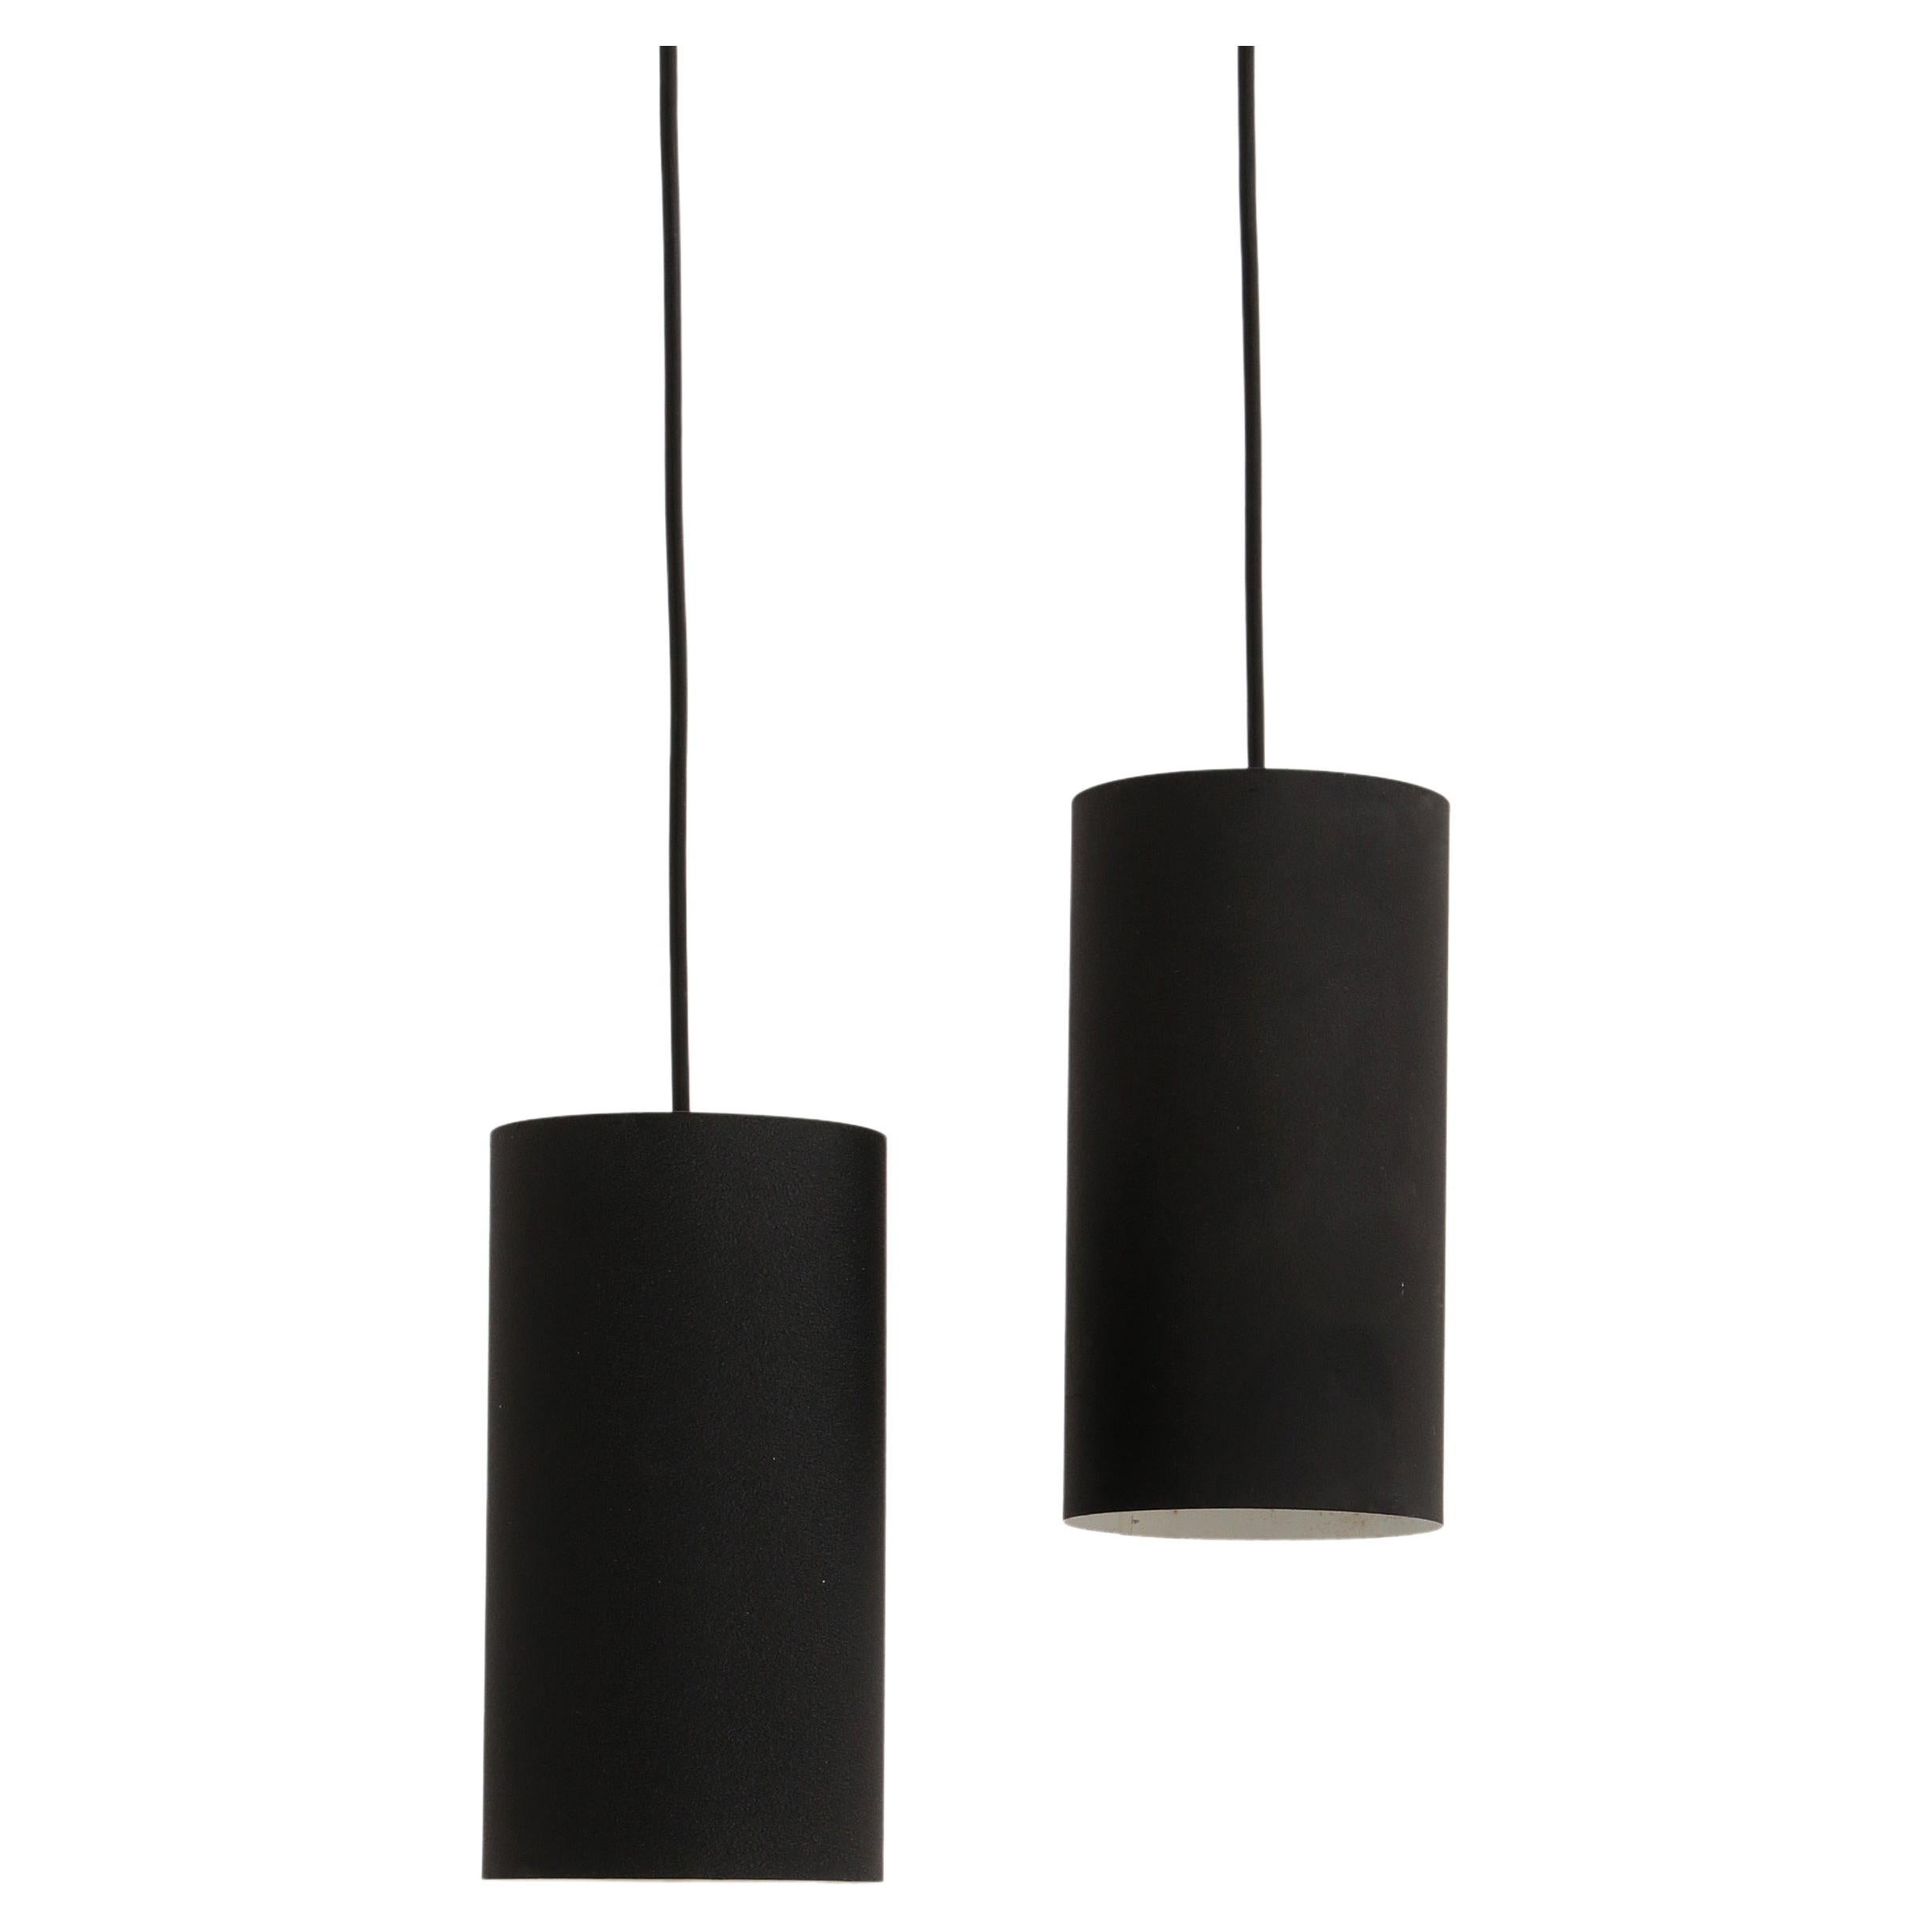 Philips Set of 2 Hanging Lamps Model Nt 48 Design by Argenta, 1960 For Sale